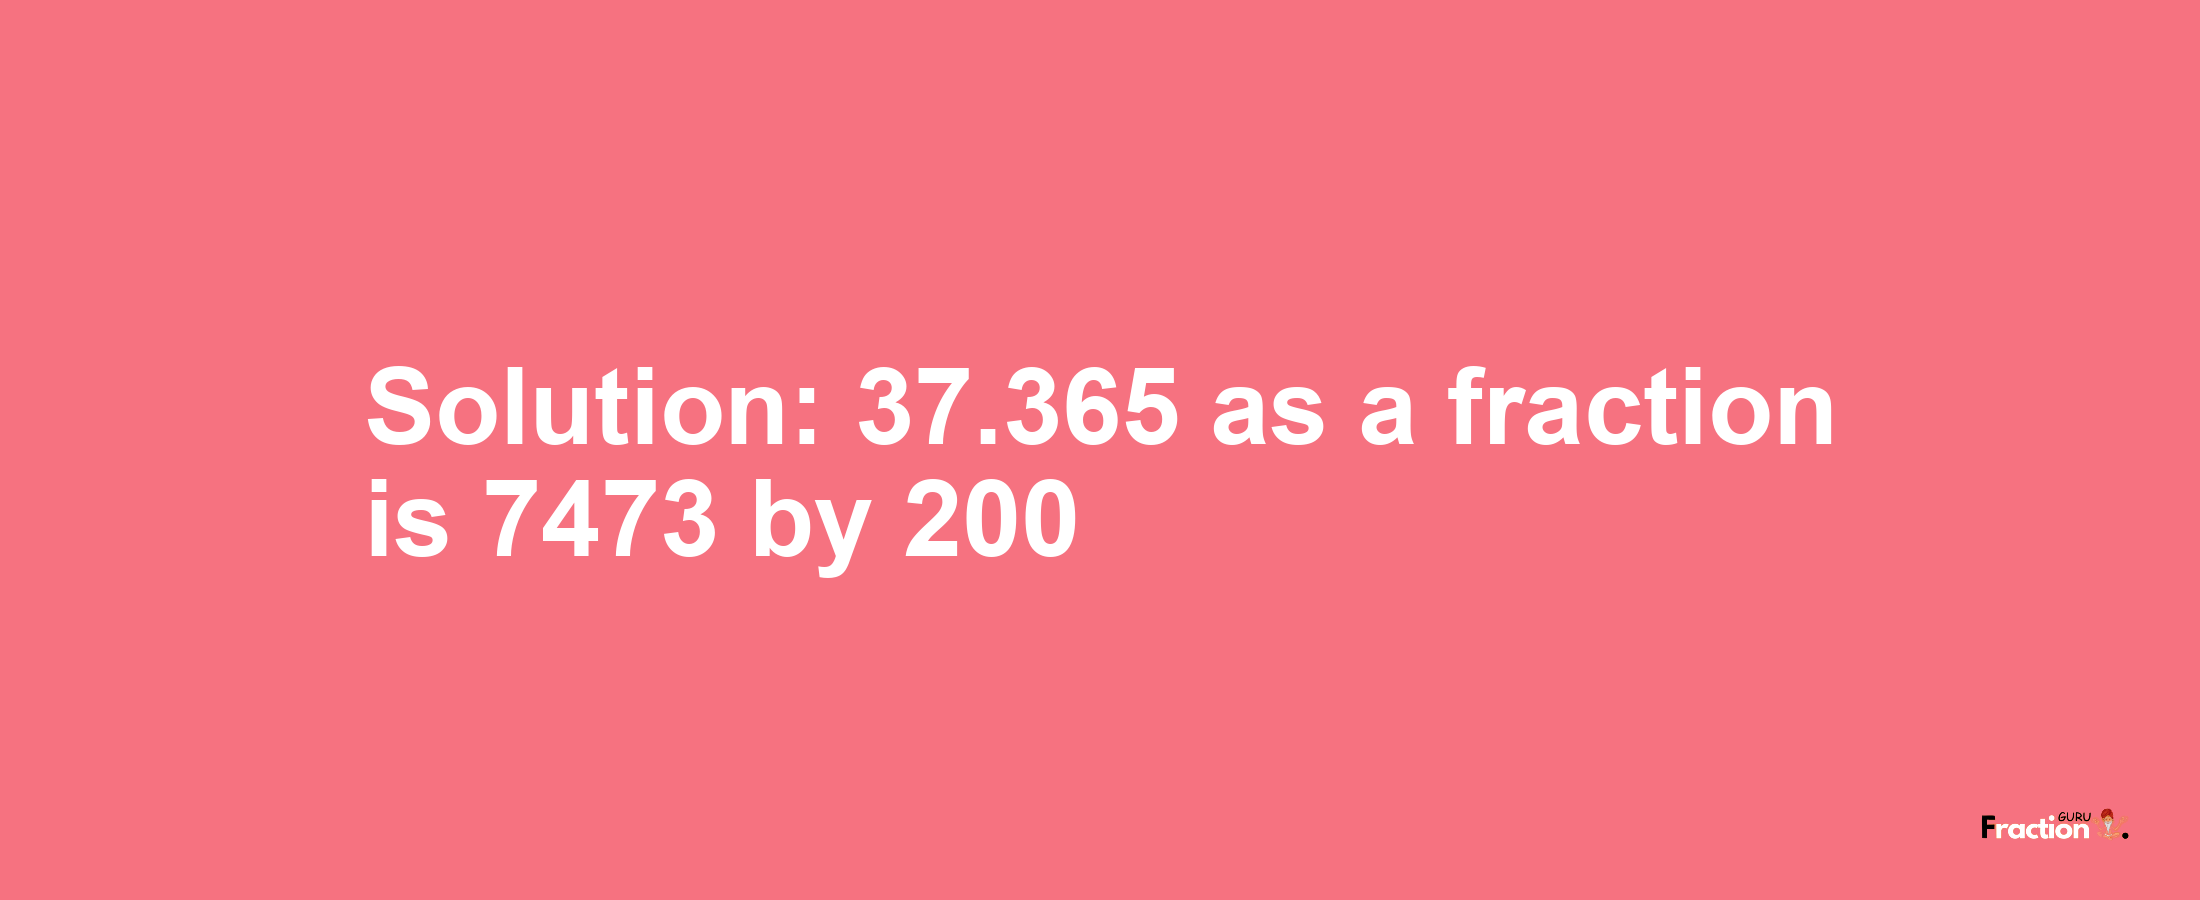 Solution:37.365 as a fraction is 7473/200